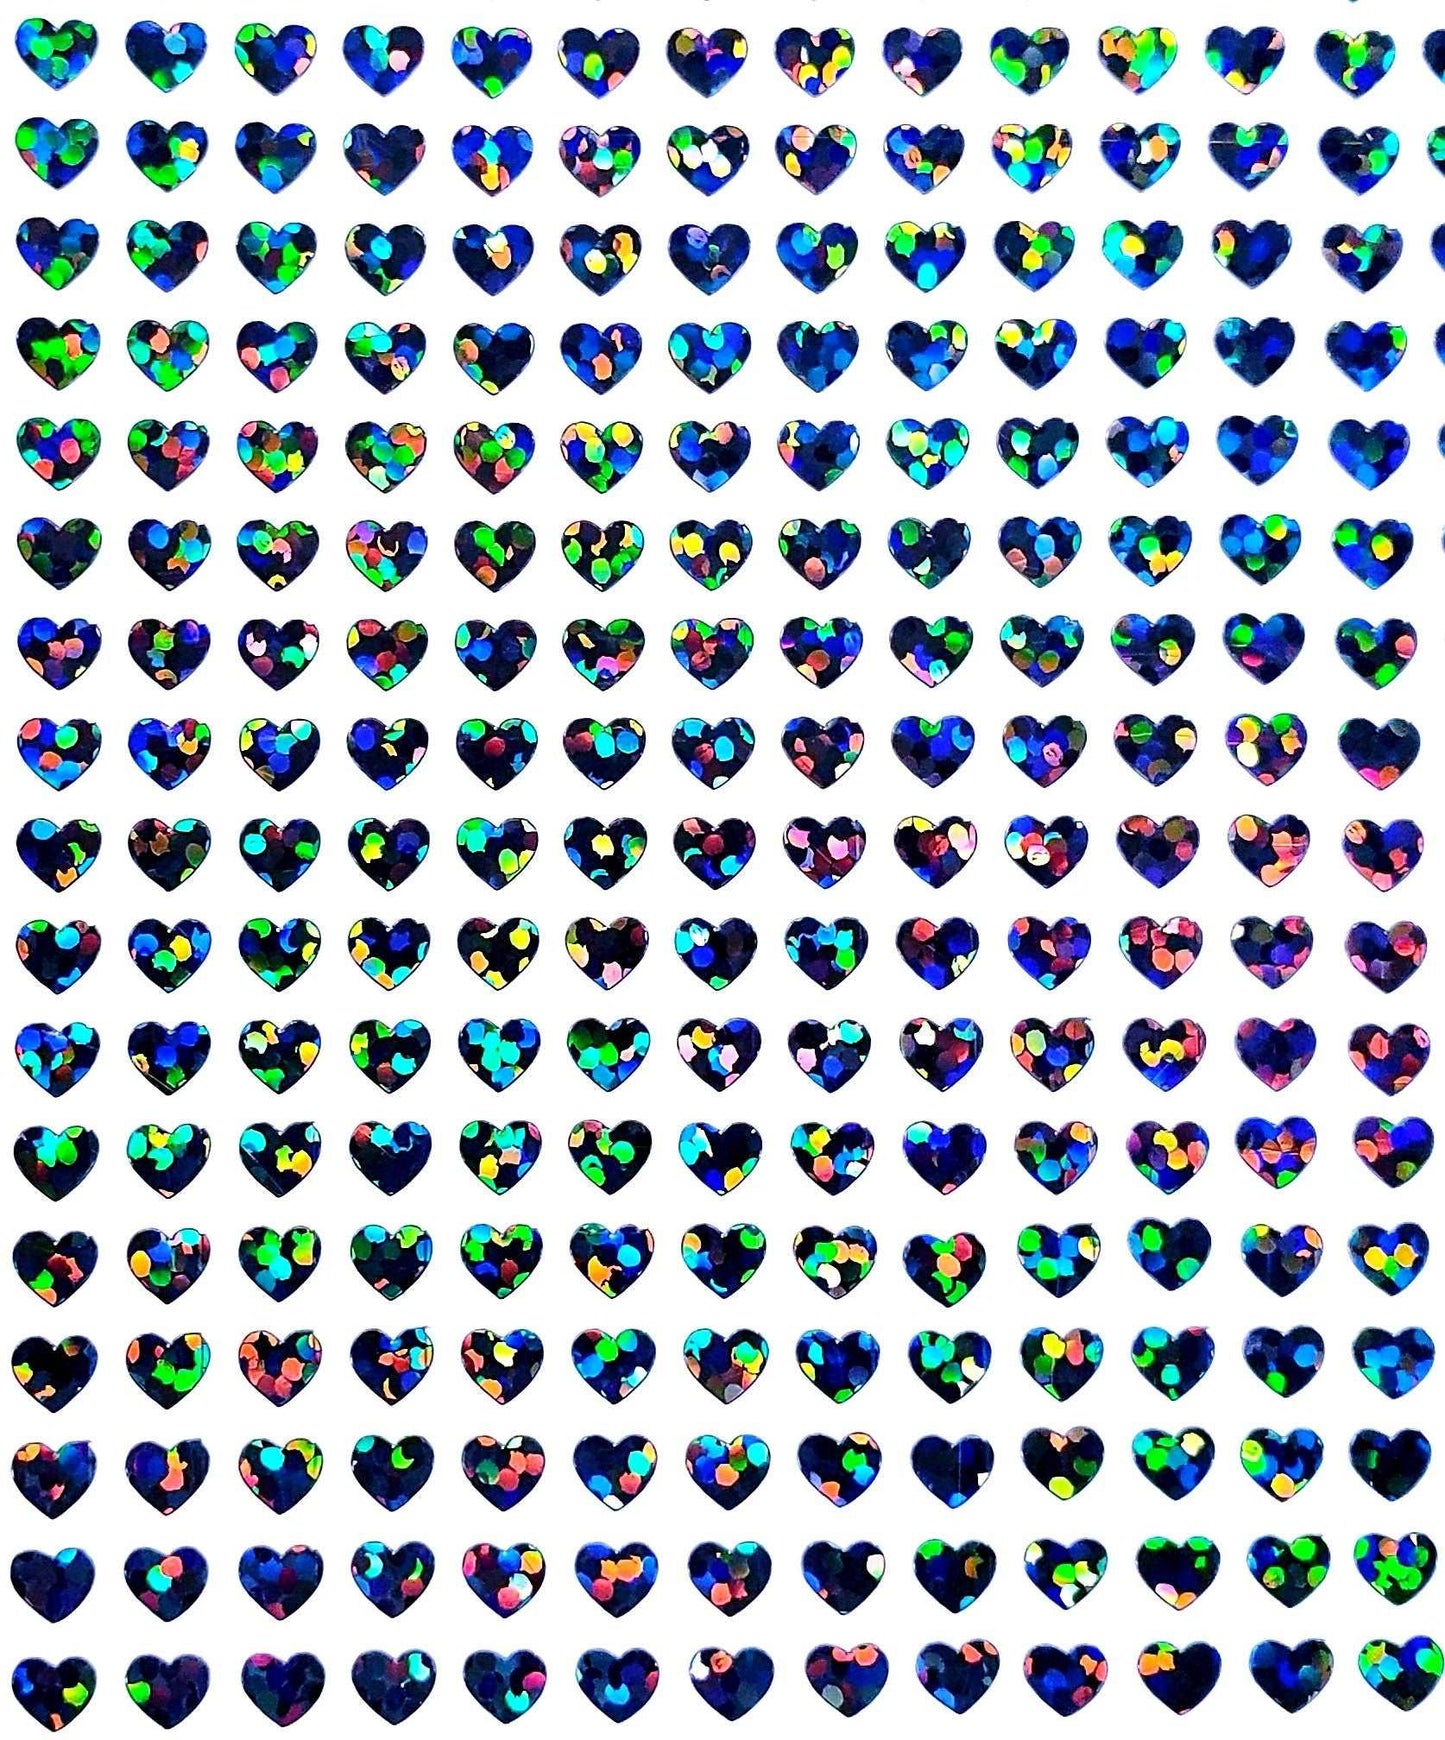 Heart Stickers, set of 640 extra small black glitter holo deco stickers for journals, notebooks, toploader card sleeves and planners.